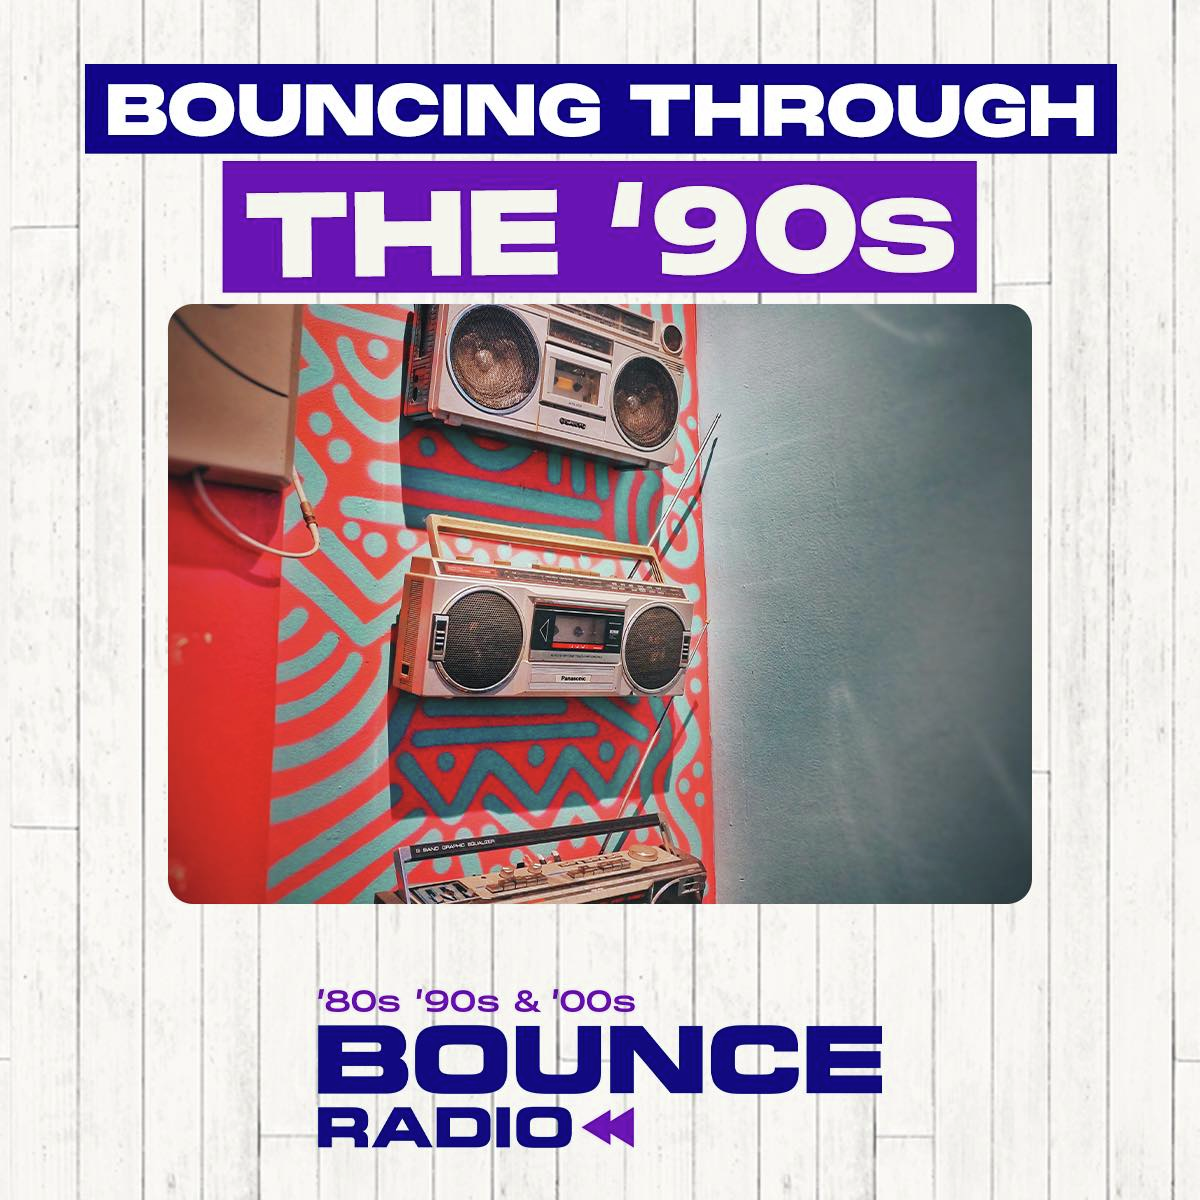 Bouncing Through The 90's All Weekend Long!